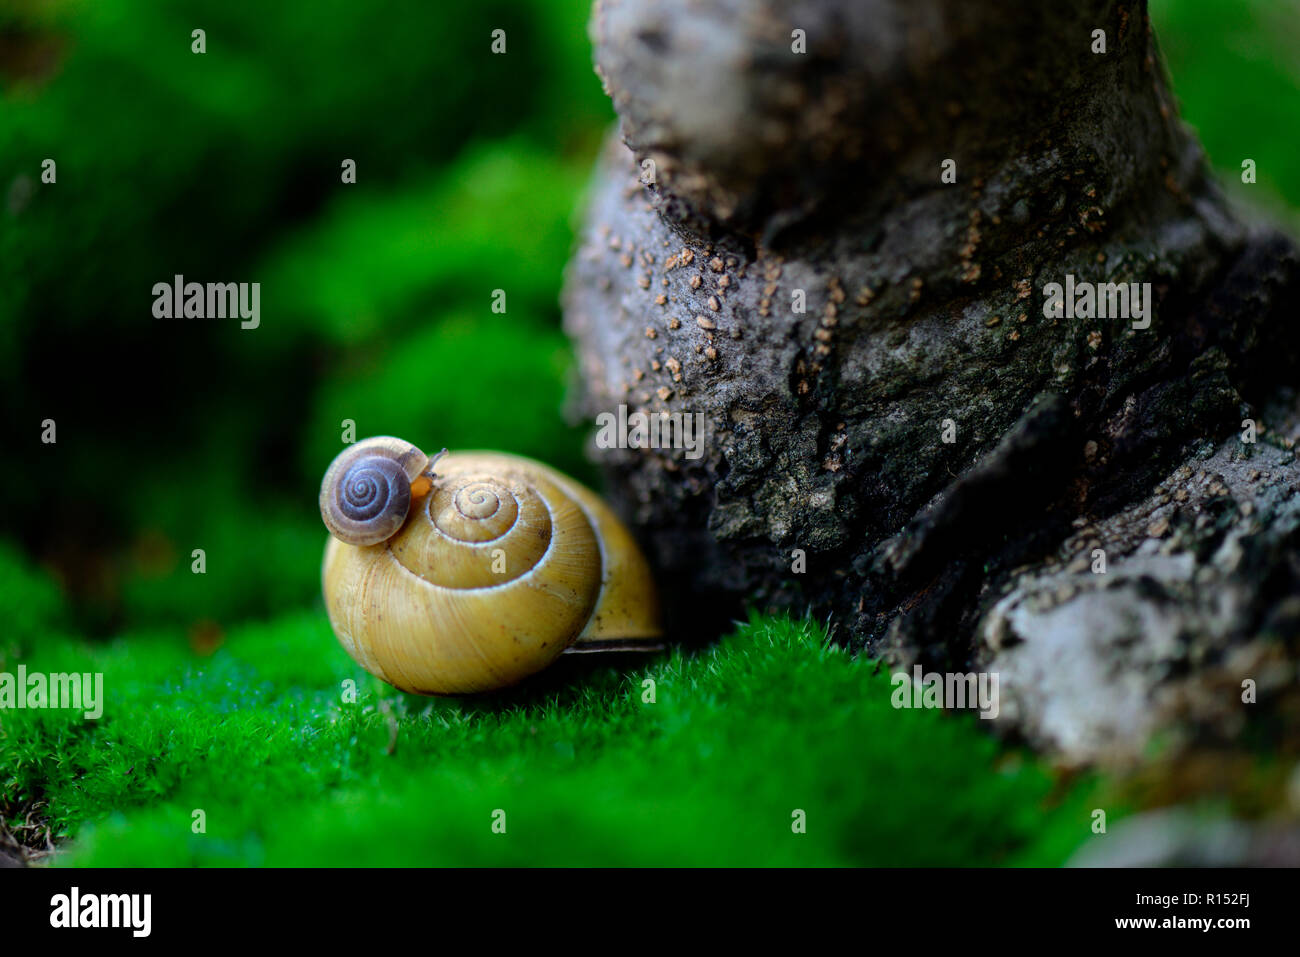 young snail on snail shell Stock Photo